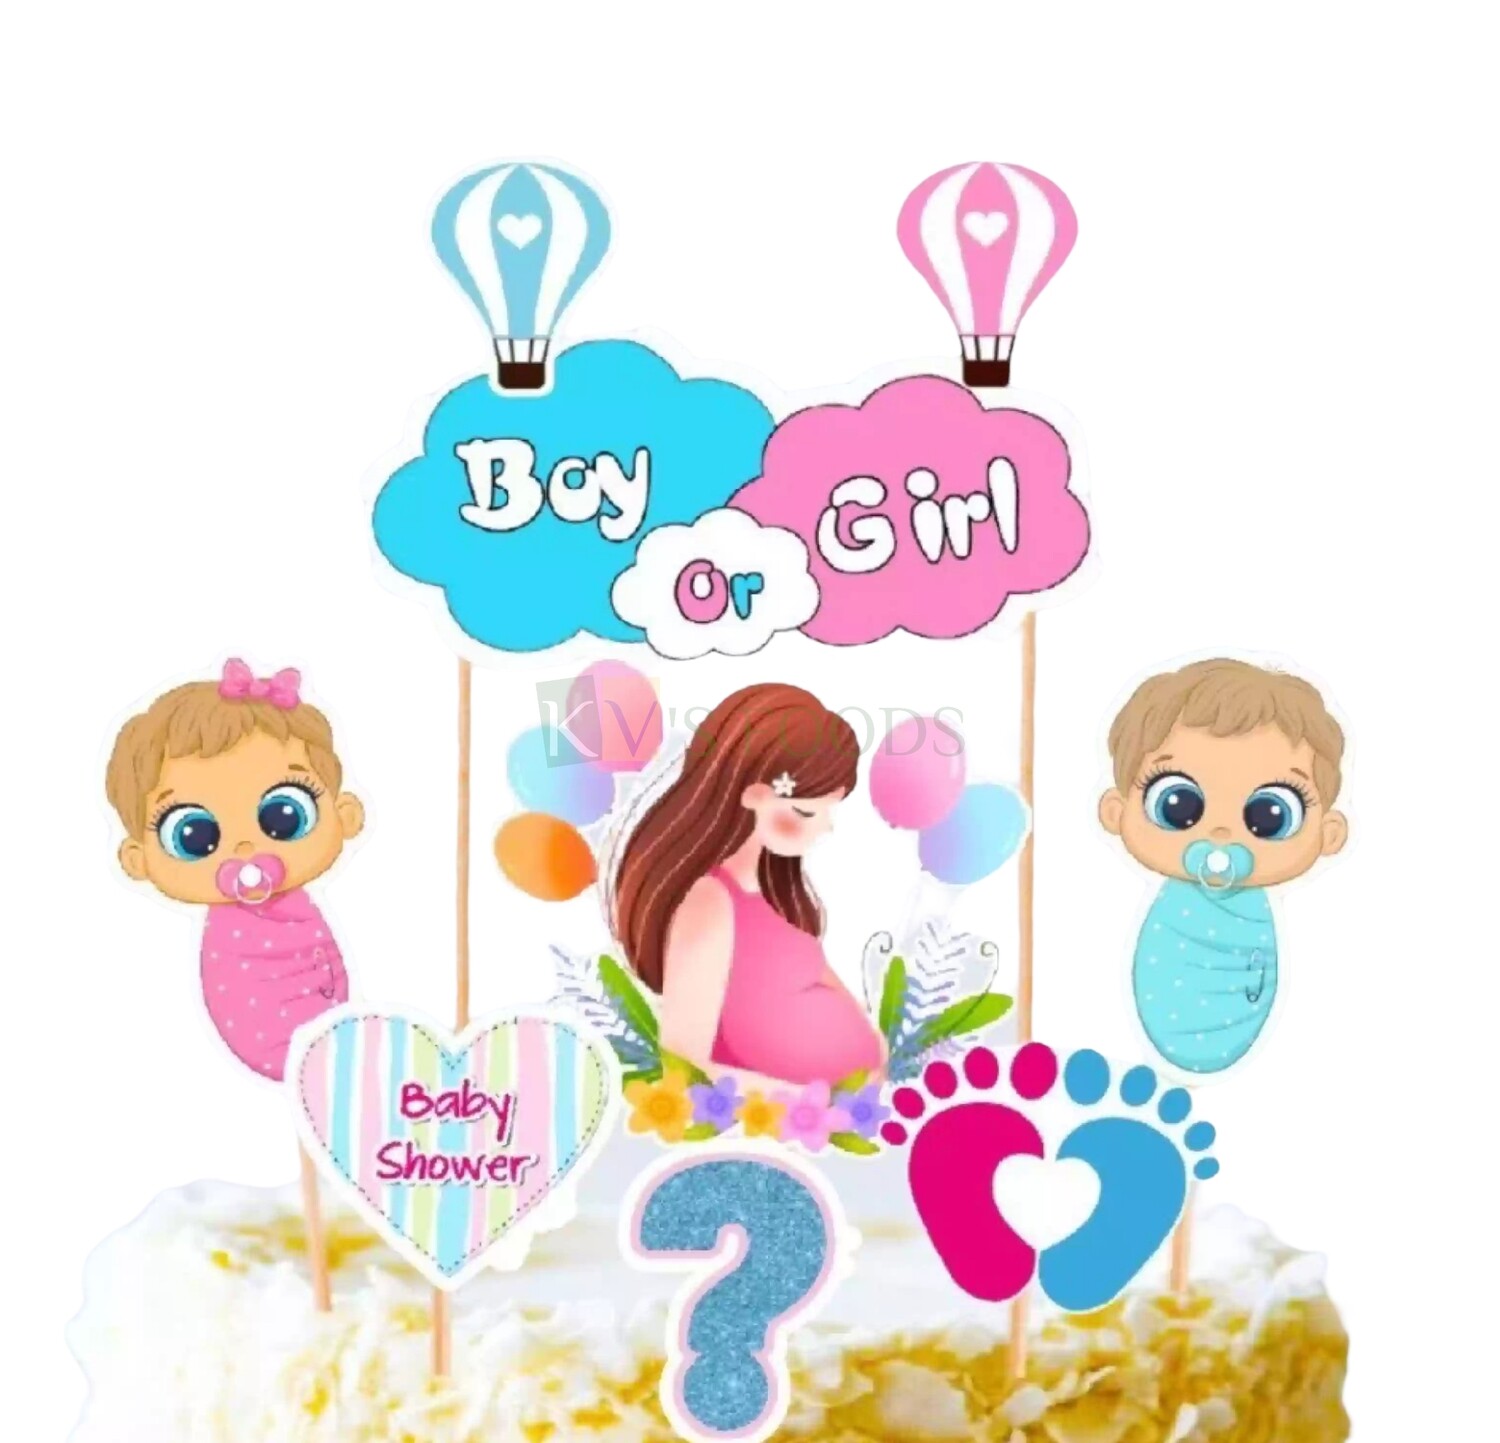 7 PC Baby Shower, He or She Theme, Cake Topper Insert, Cake Topper, Cupcake Toppers Bday, Girls, Boys, Friends Bday Decorations Items/Cake Accessories, Tags, Cards, Cake Toothpick Topper